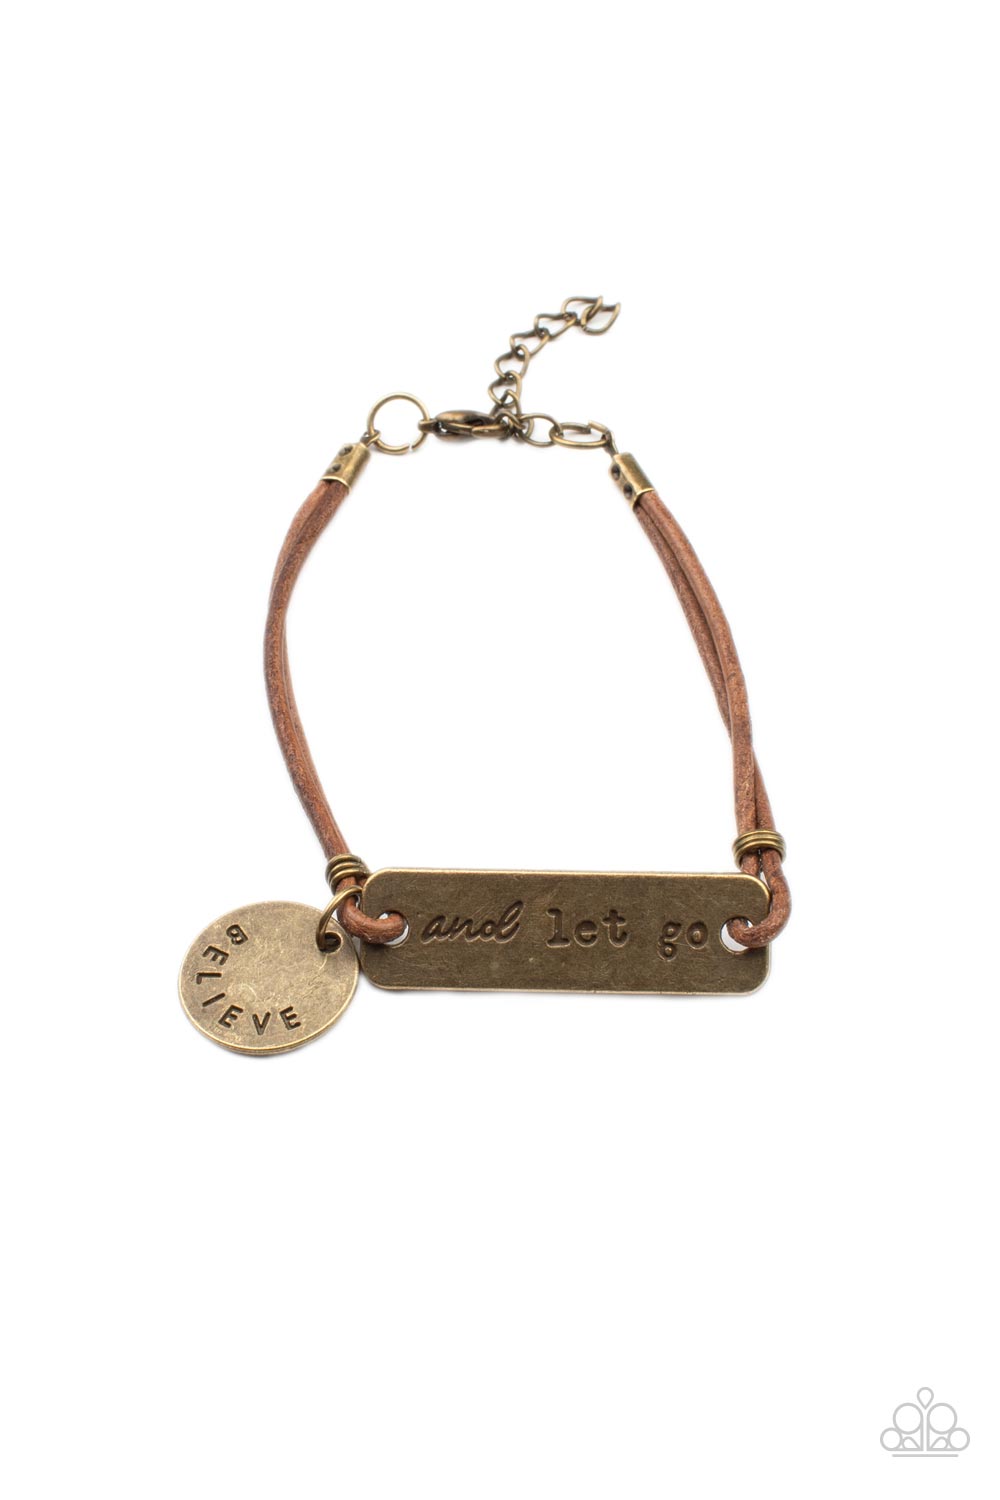 Paparazzi Accessories Believe and Let Go - Brass